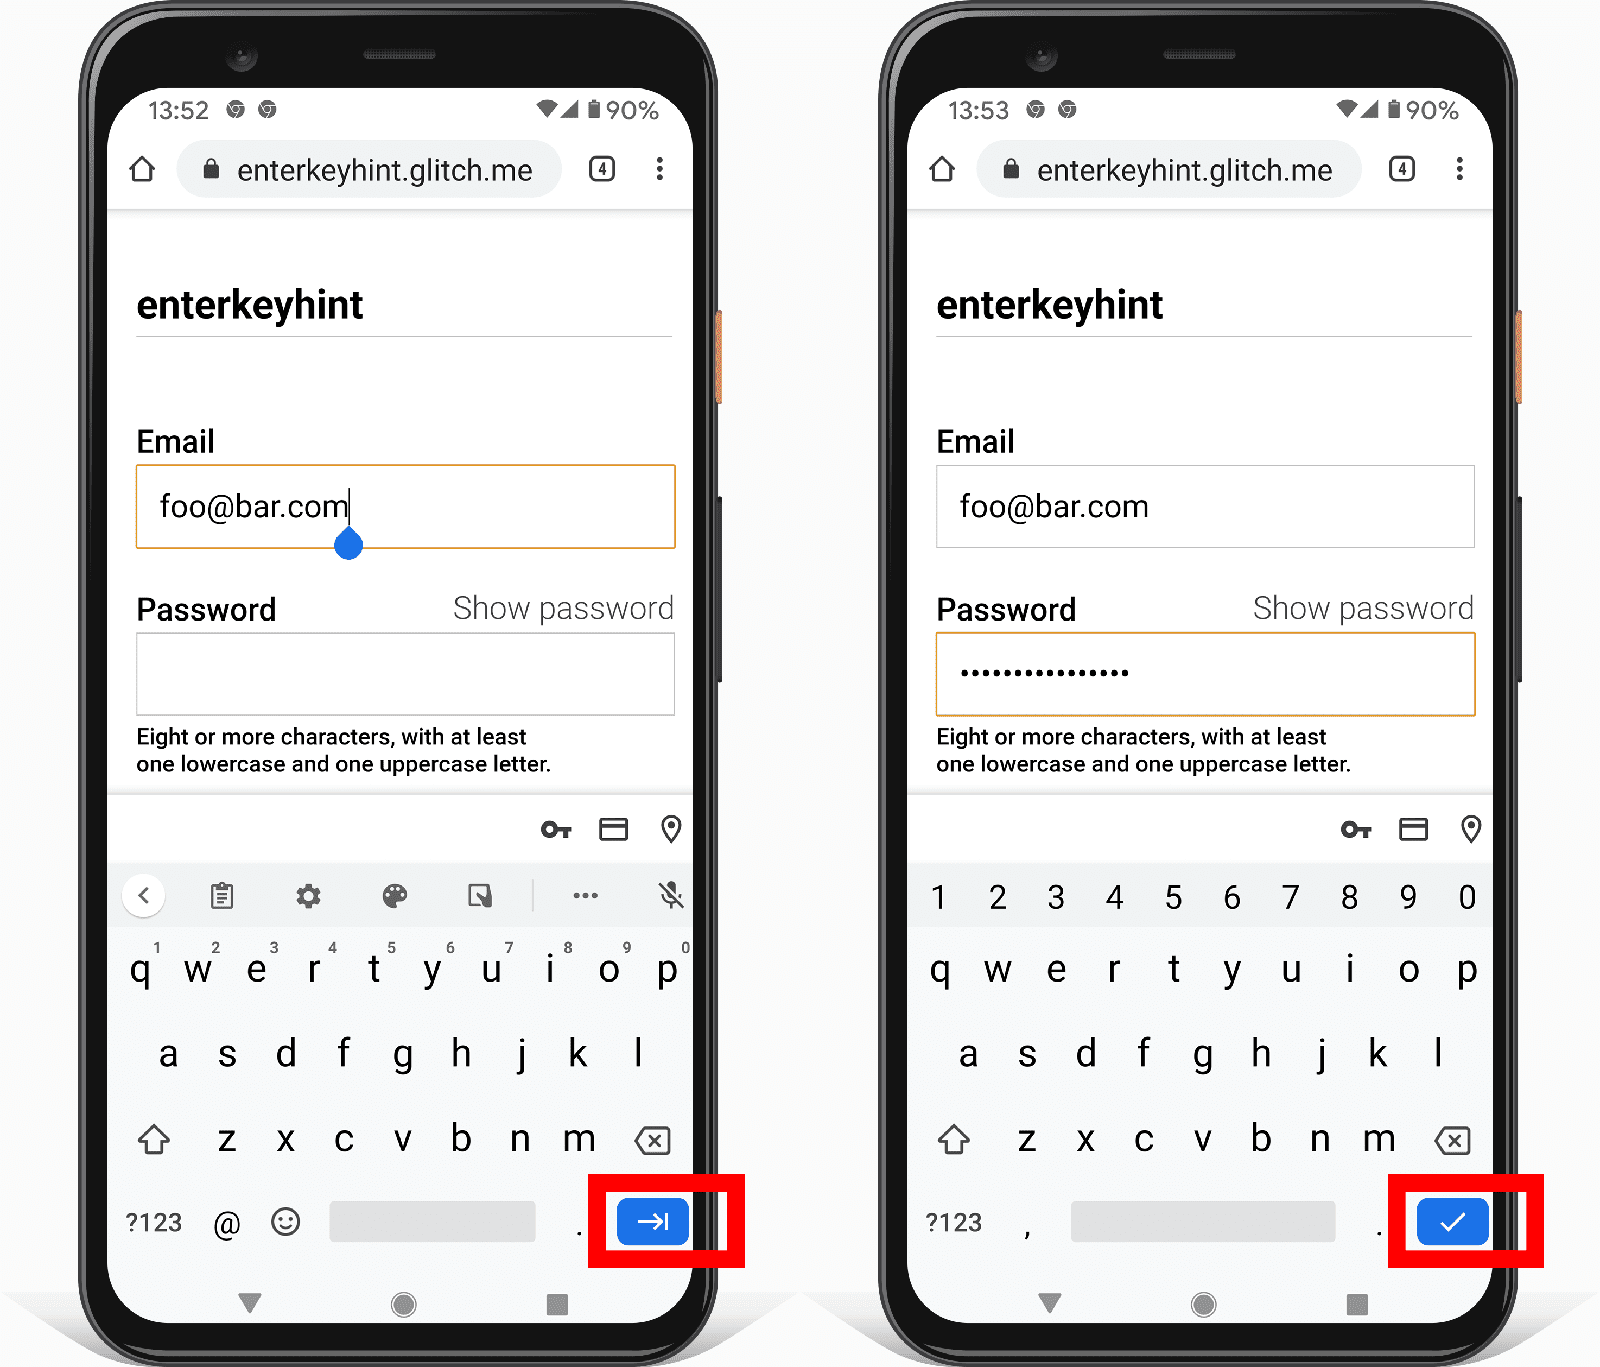 Two screenshots of an address form on Android showing how the enterkeyhint input attribute changes the enter key button icon.